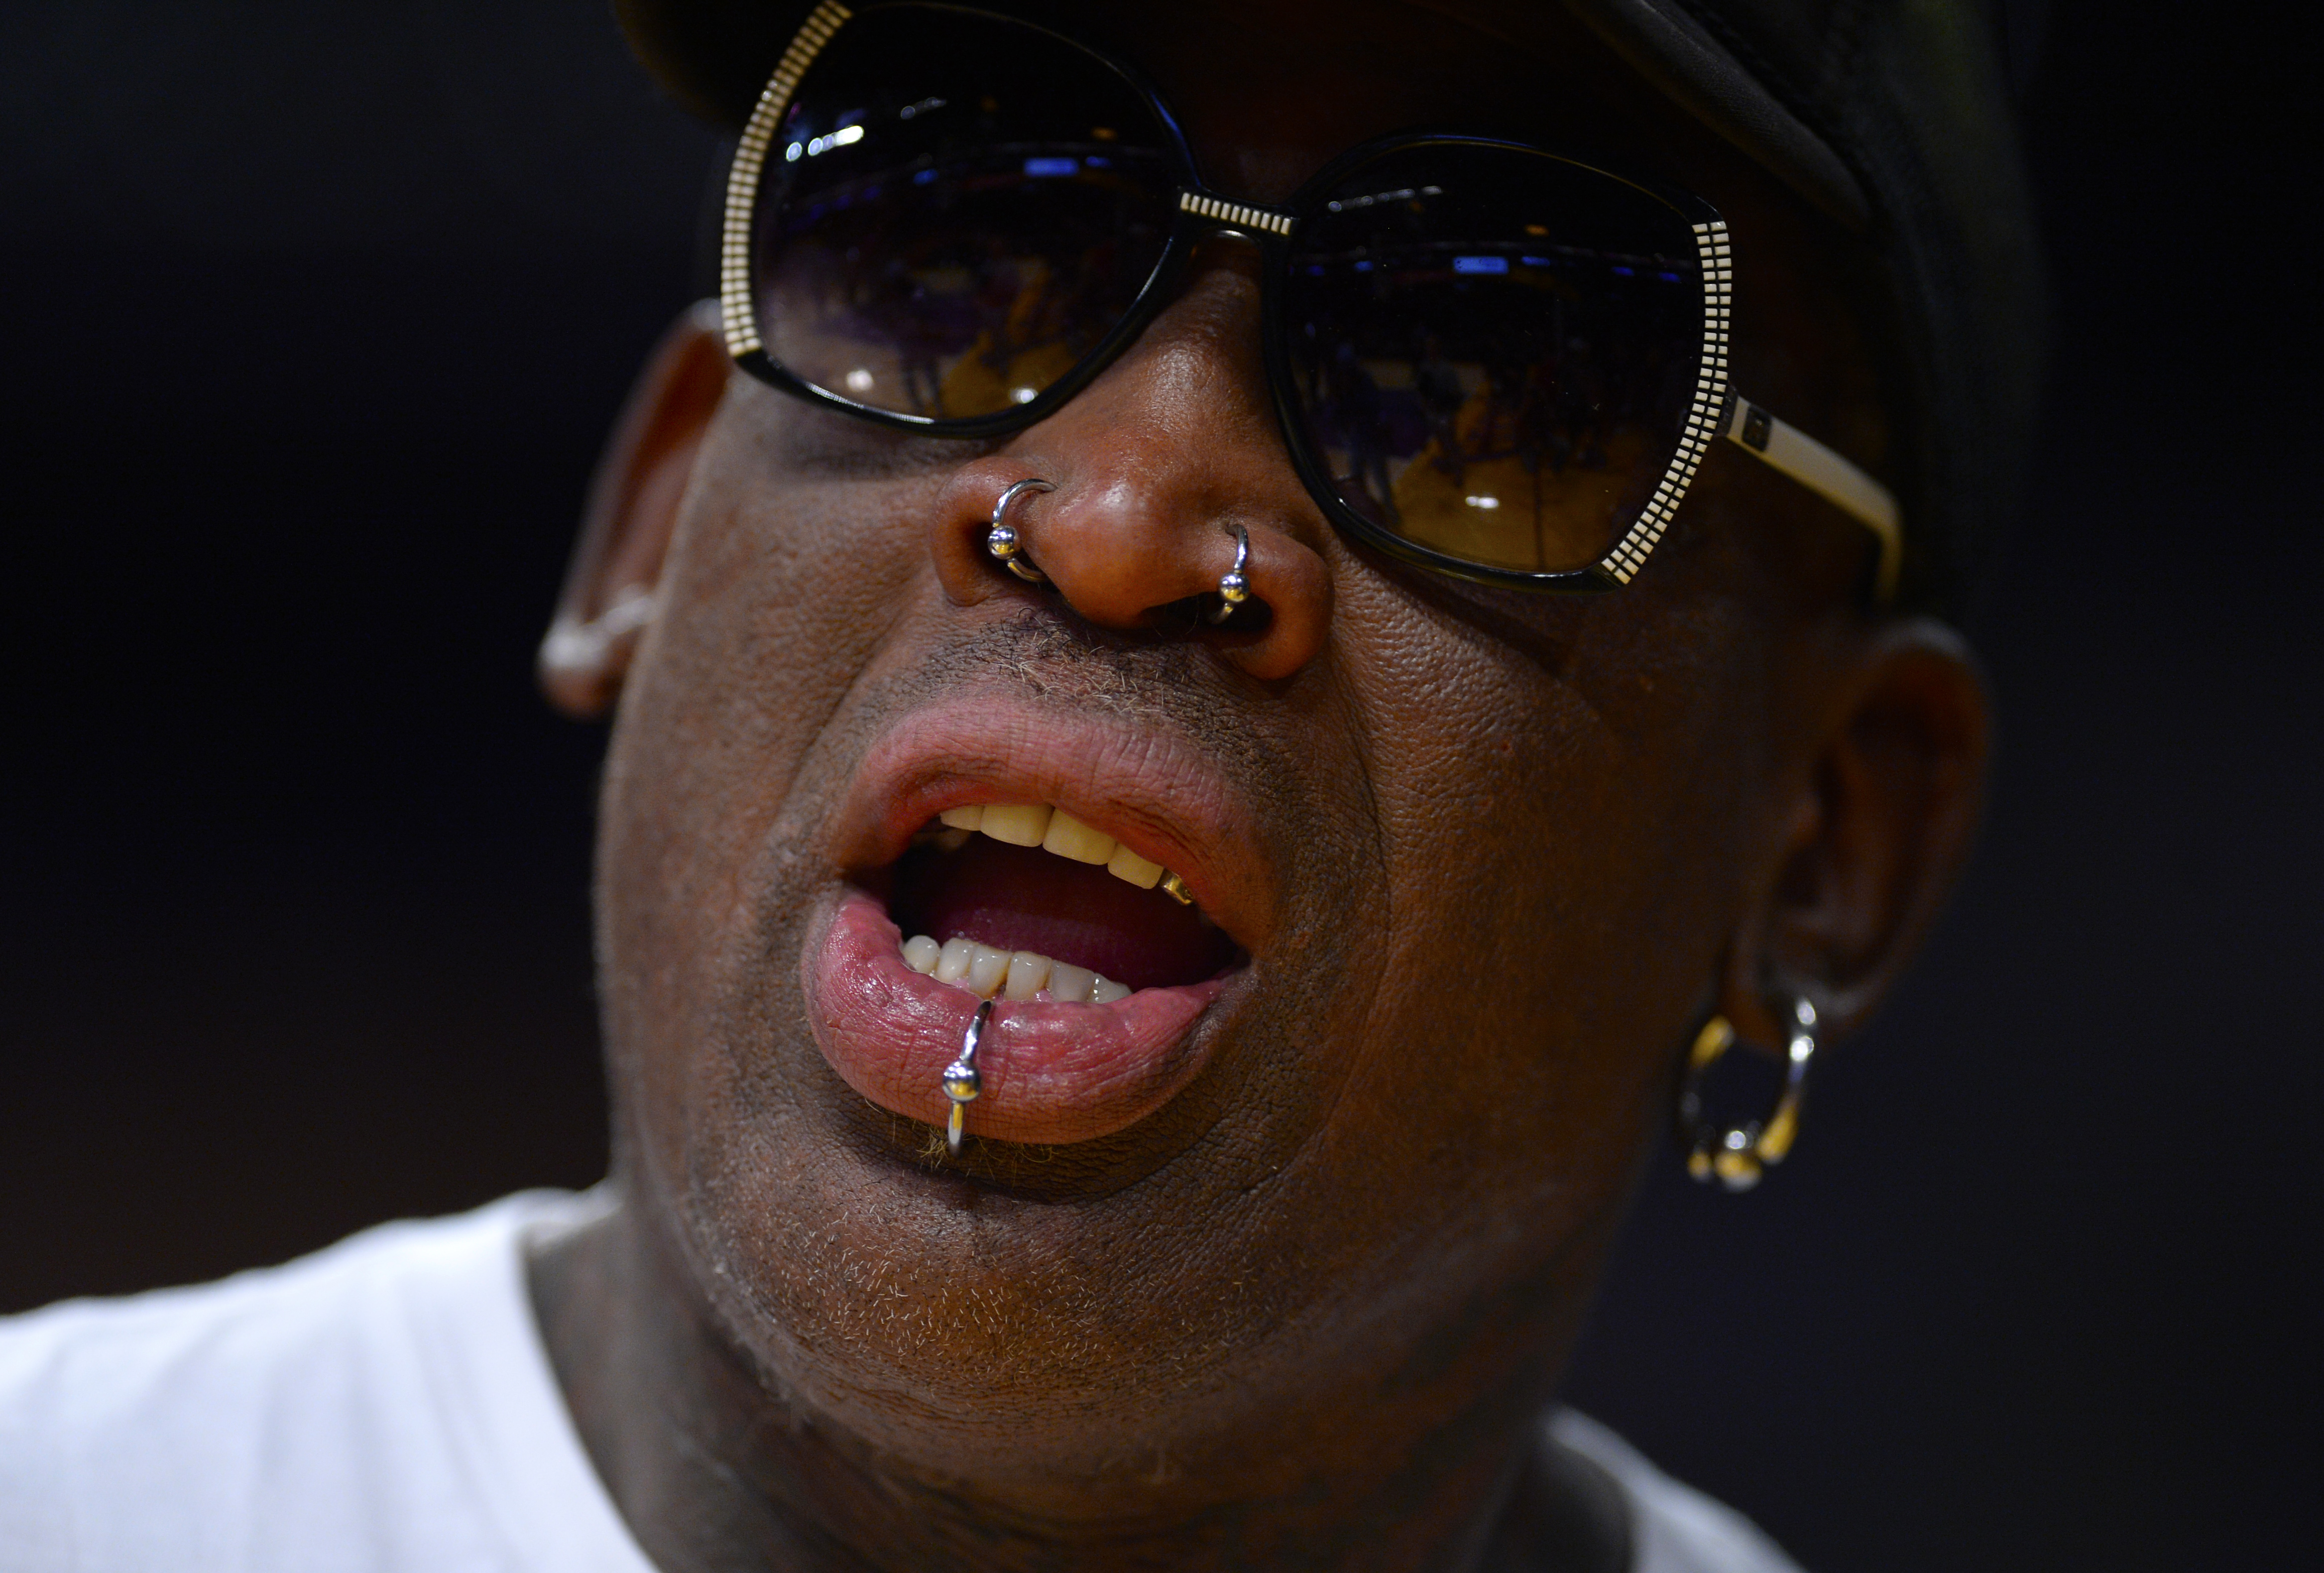 LOS ANGELES, CA - NOVEMBER 25:  Former NBA player Dennis Rodman before the start of the game between the Golden State Warriors and the Los Angeles Lakers (Robert Laberge&mdash;Getty Images)